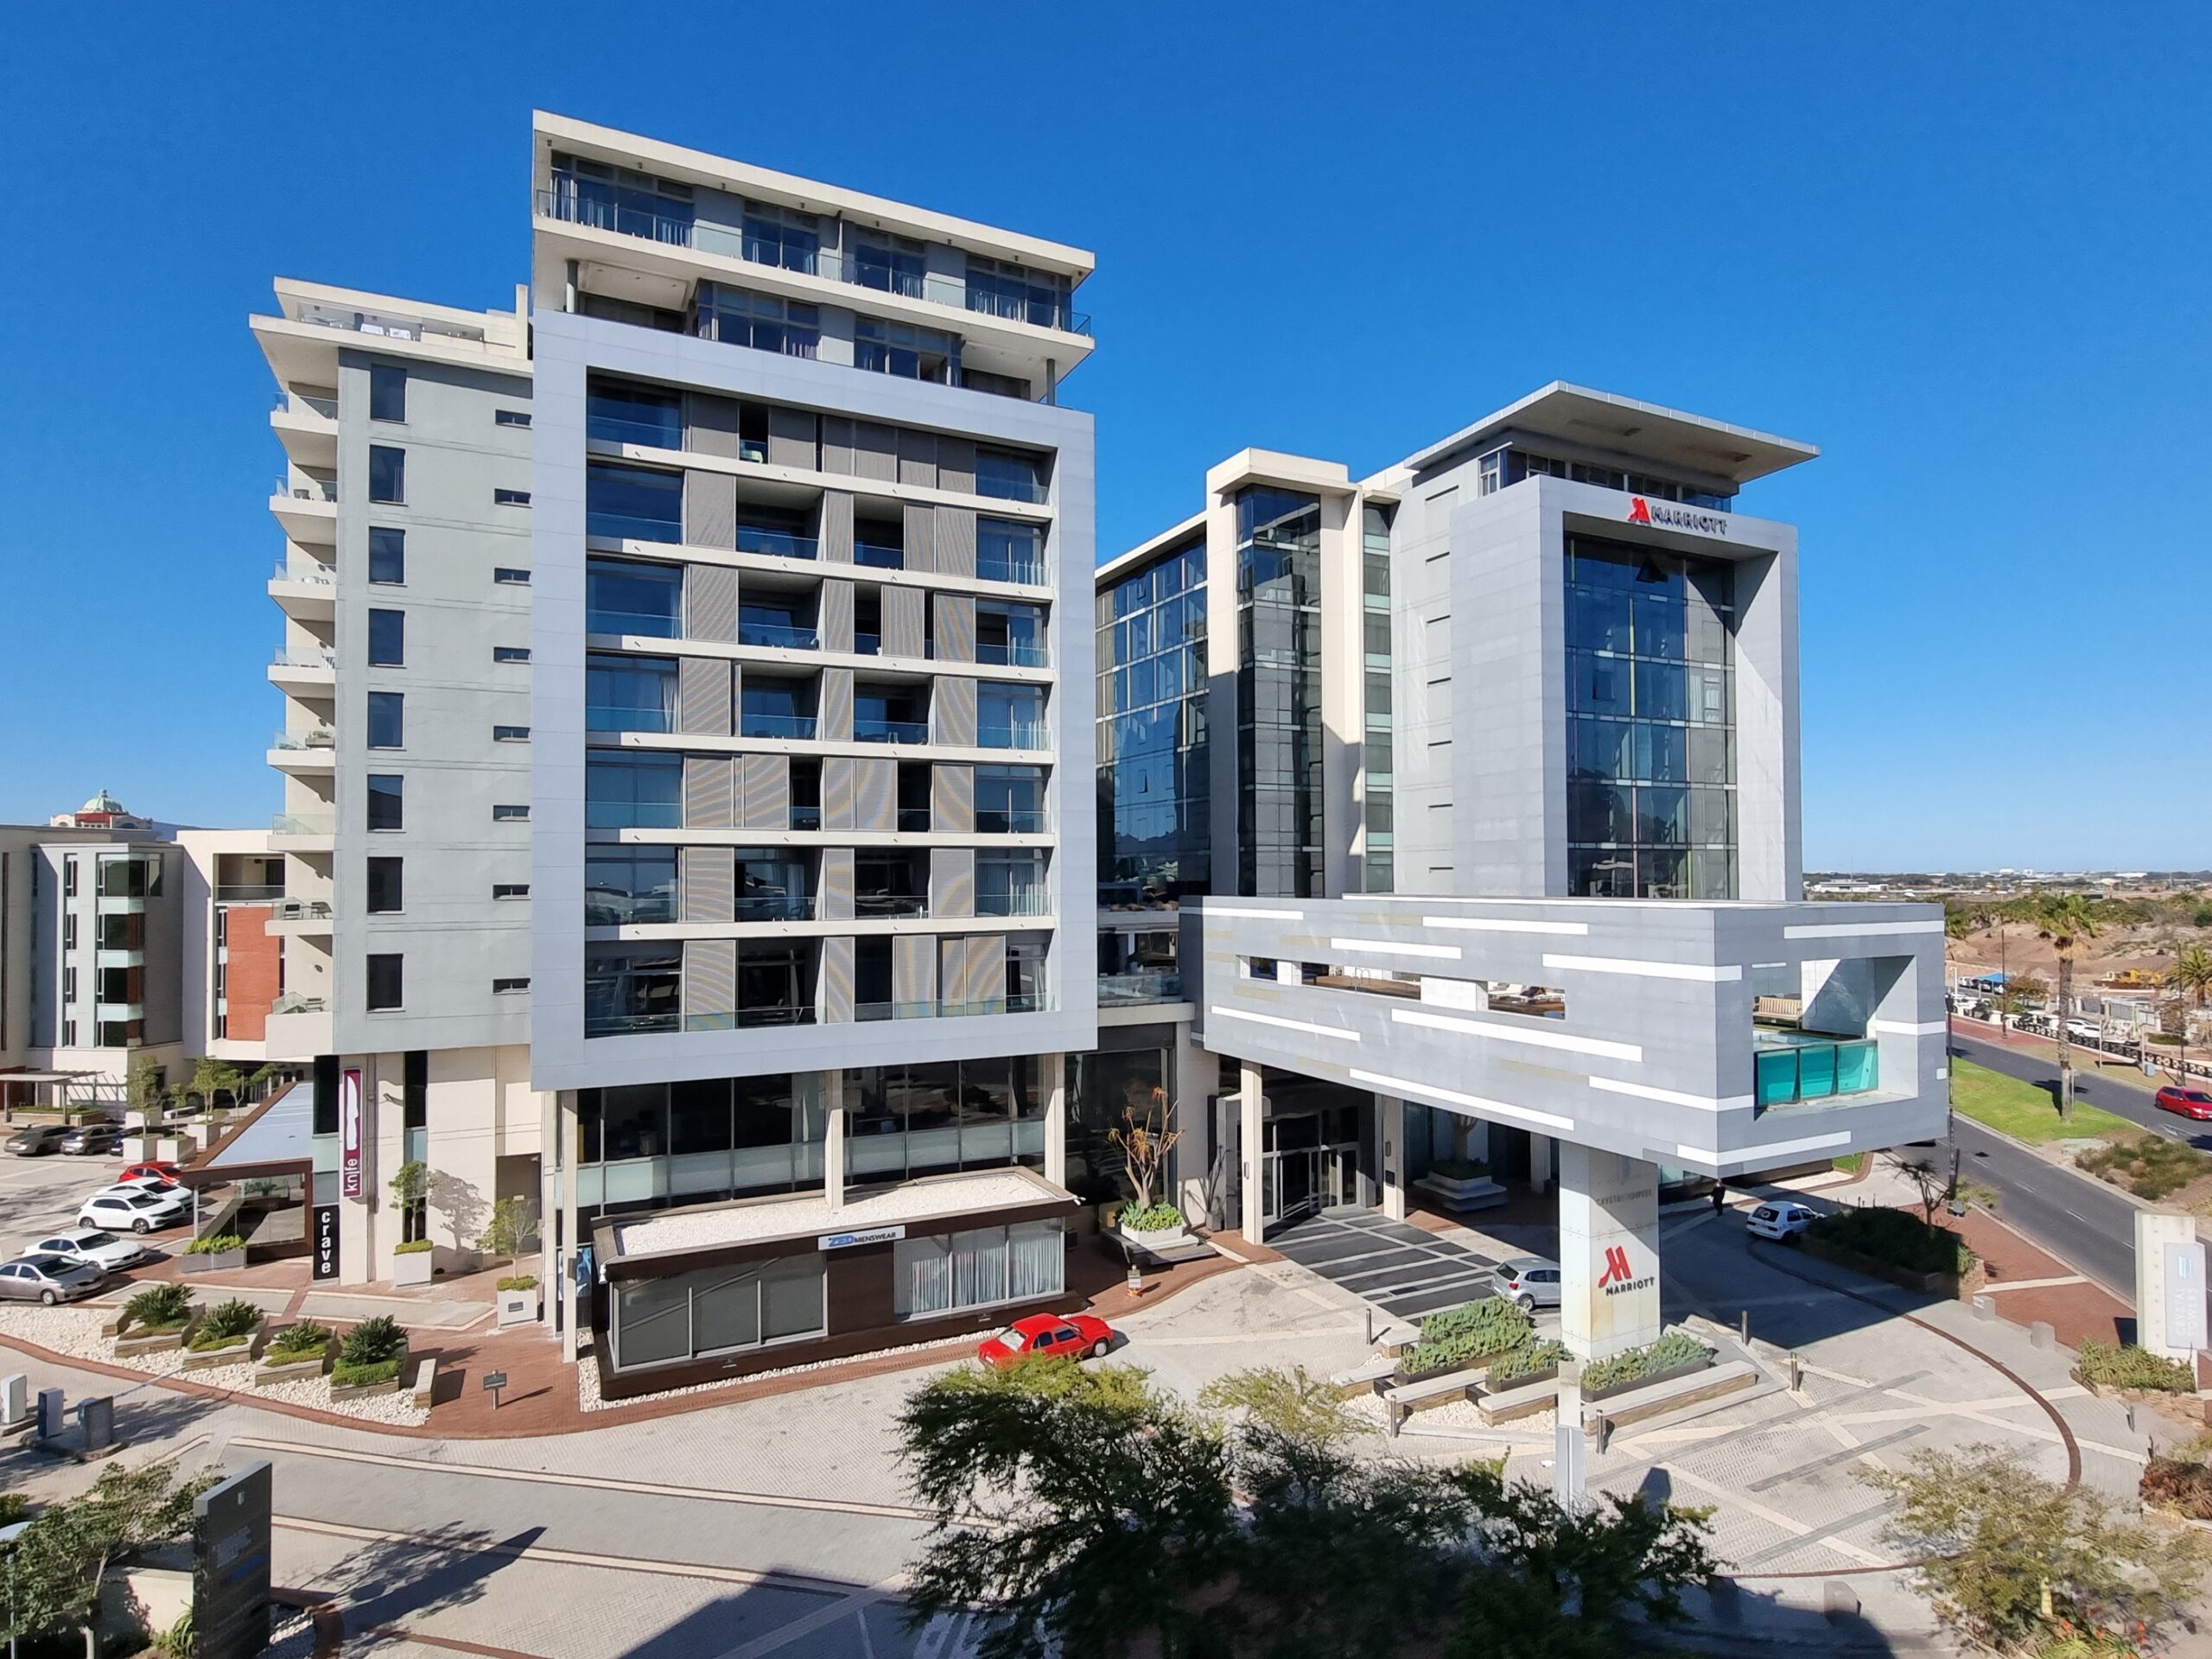 Apartments in demand, up to R70,000/month to rent, R50 million to buy